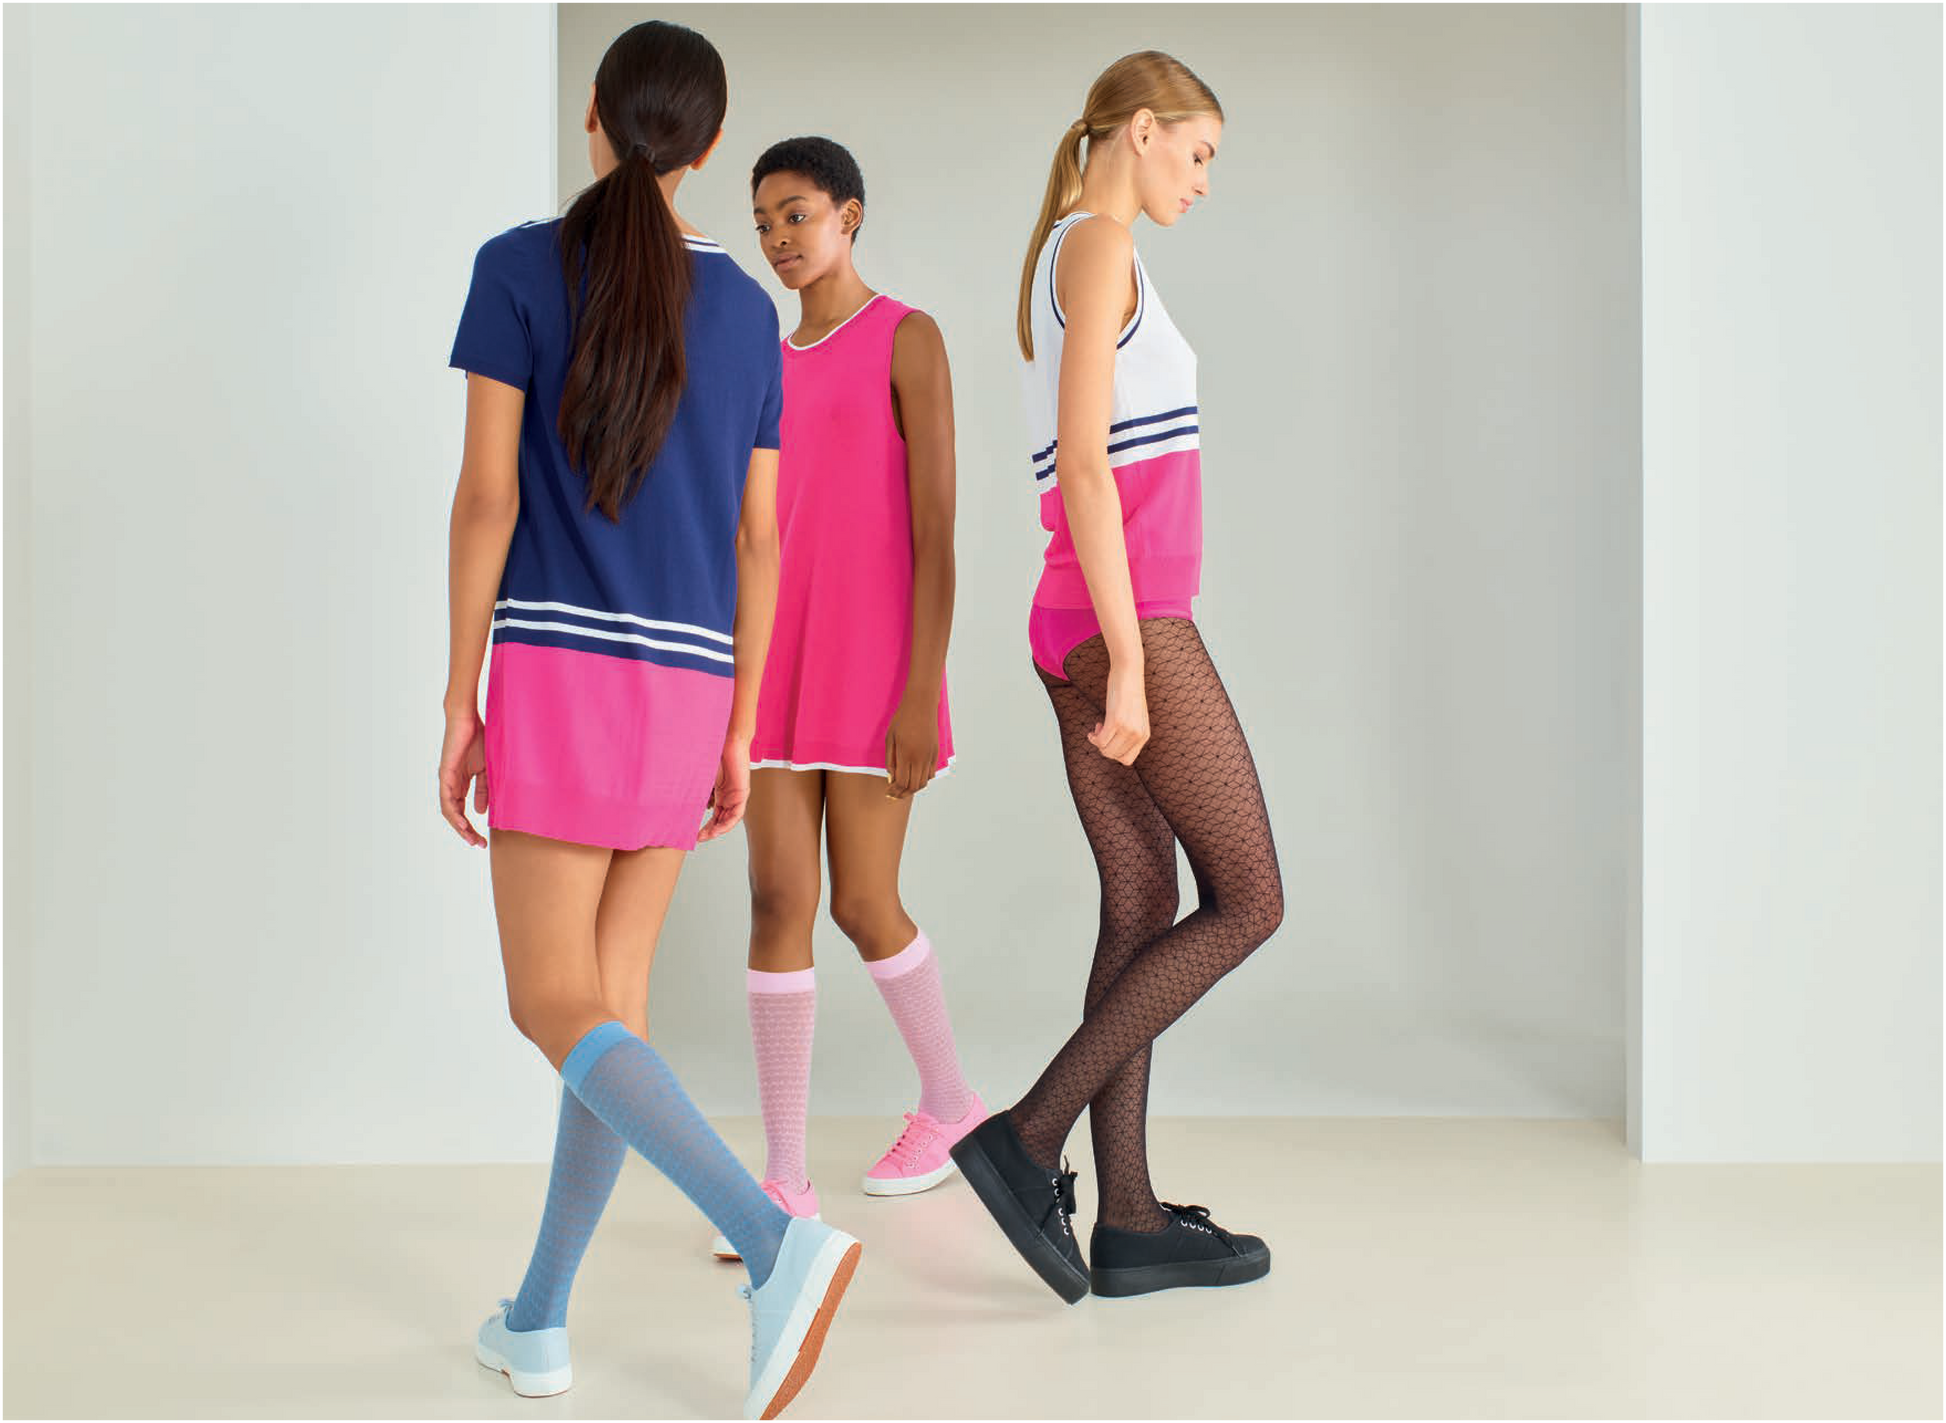 Oroblù Eco Sneaker Geometry Gambaletto - Environmentally friendly fashion knee-high socks made of recycled yarn with a triangular linear style pattern, special built in reinforced insole for high resistance and comfort thanks to the LYCRA fibre and deep comfort cuff.